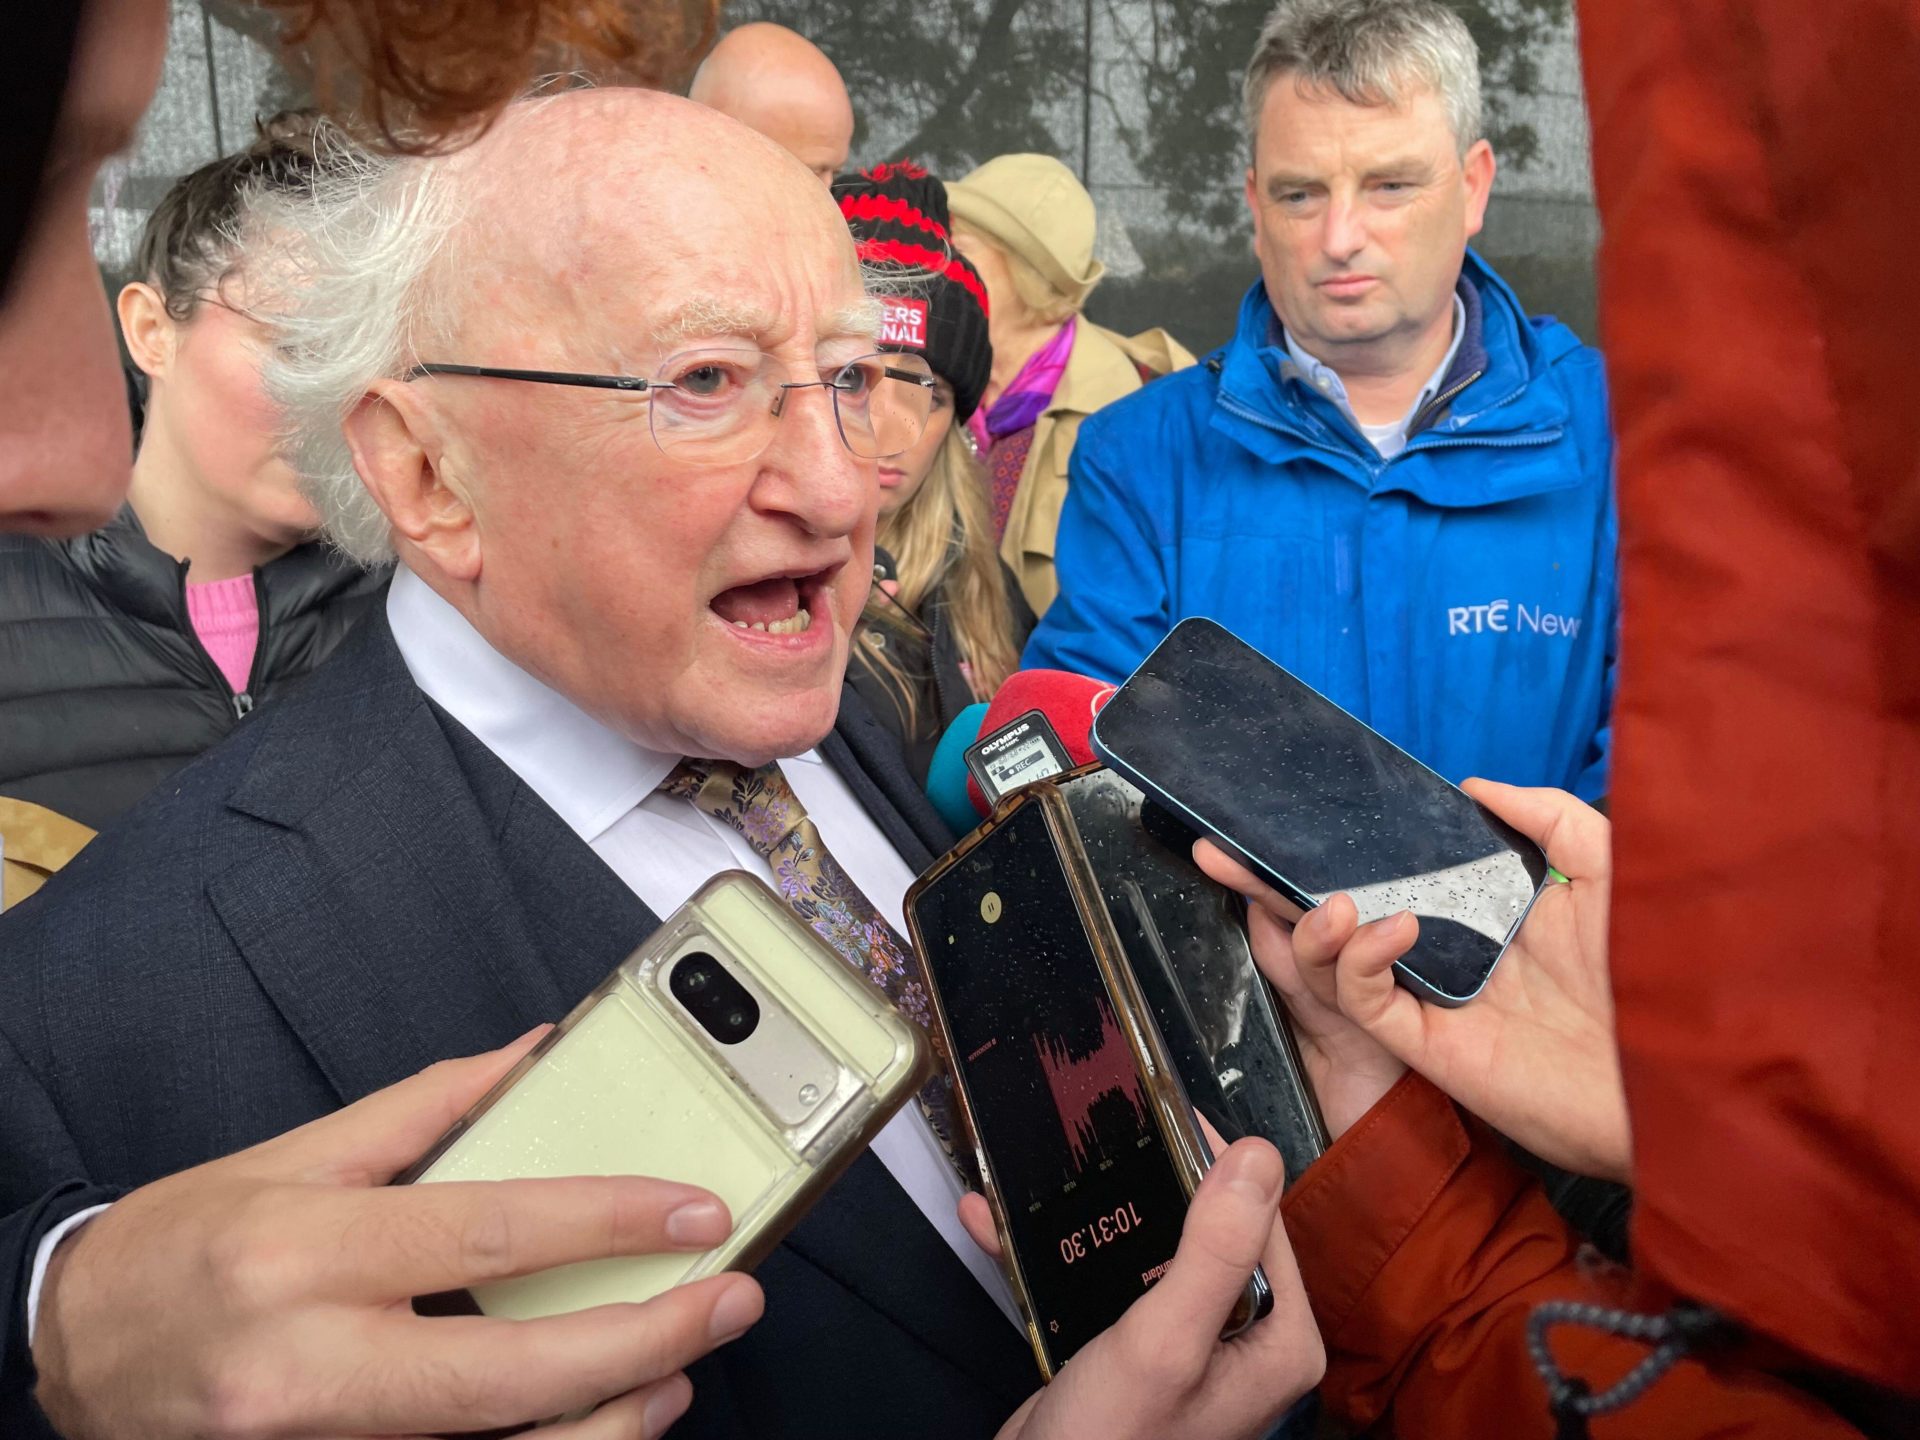 President Michael D Higgins speaks to the media about climate change during the National Ploughing Championships at Ratheniska, Co Laois. 